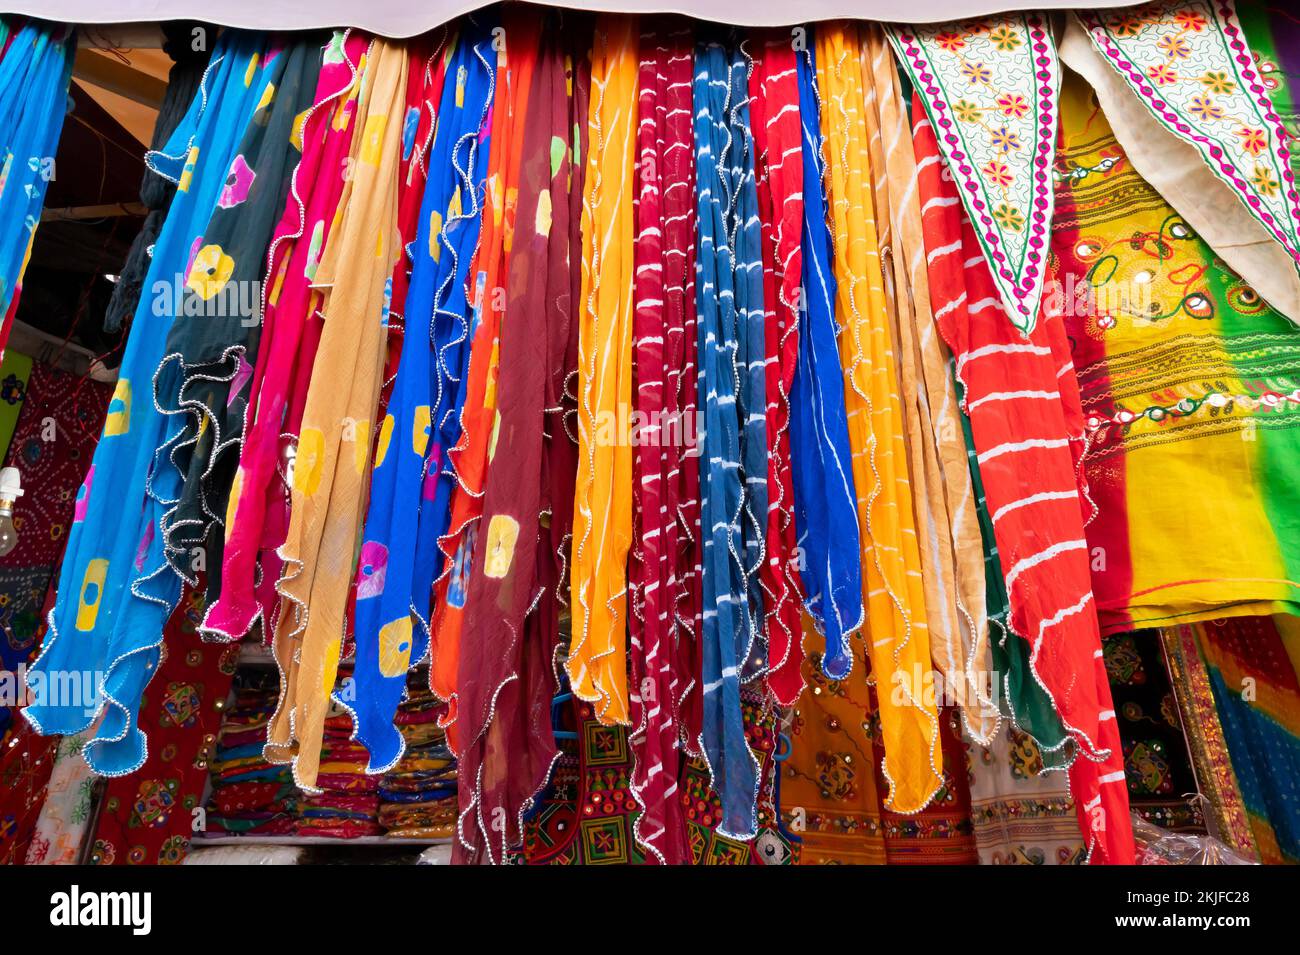 Rajasthani womens clothes are hanging for sale , being displayed in a shop at famous Sardar Market and Ghanta ghar Clock tower in the evening. Stock Photo